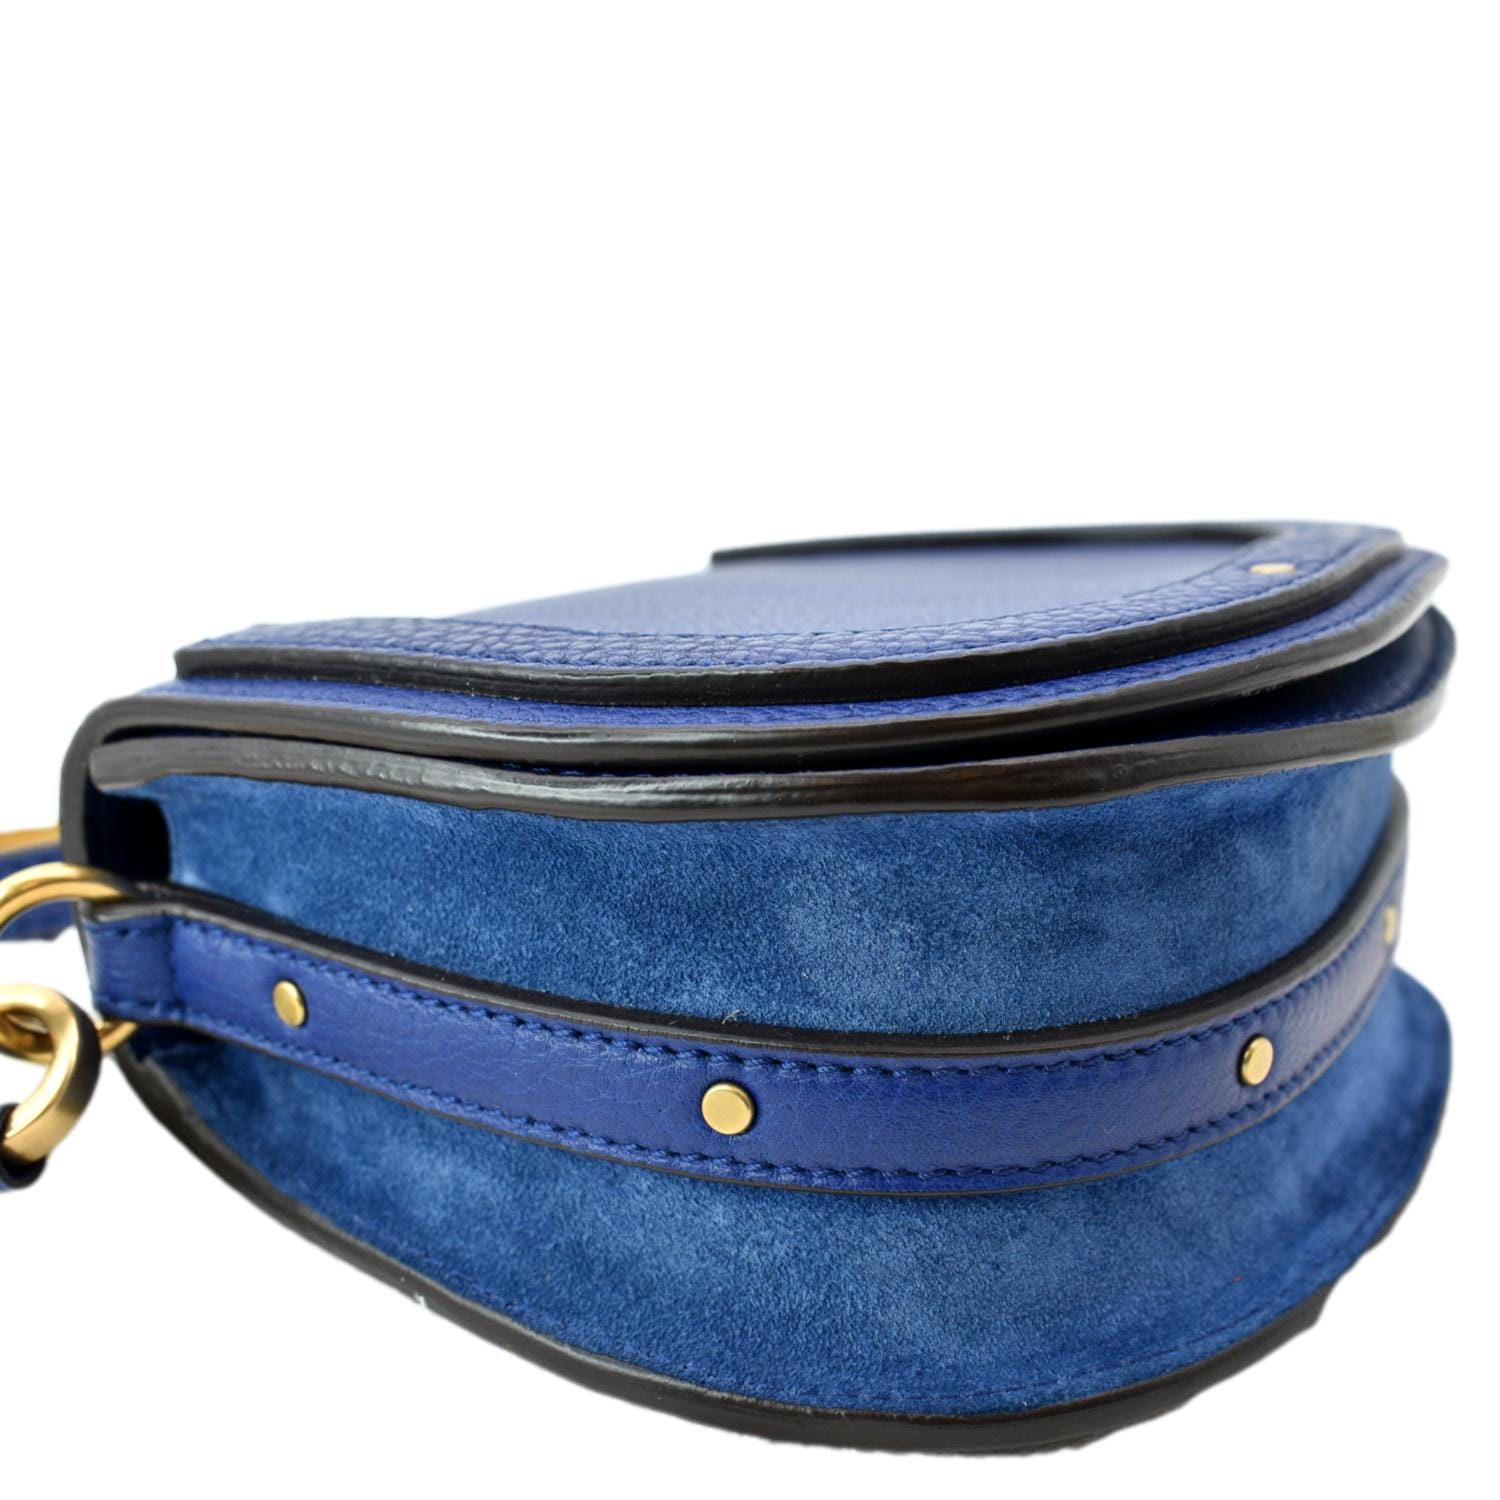 Chloe Navy Blue Leather And Suede Small Nile Bracelet Minaudiere Shoulder Bag  Chloe